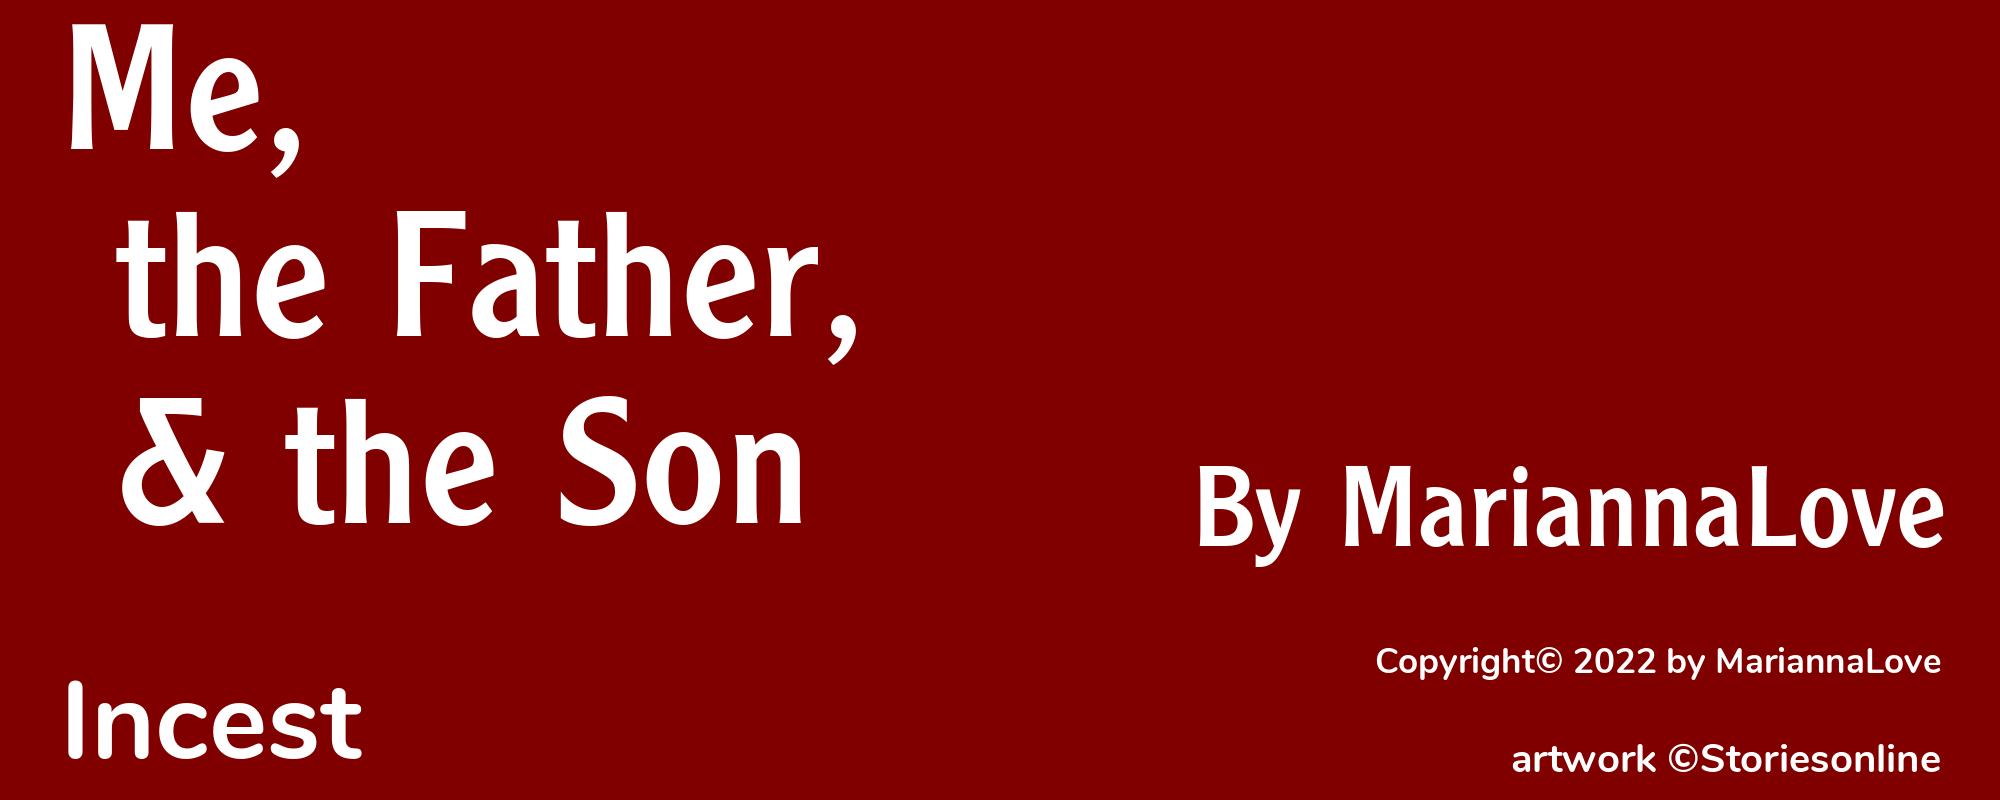 Me, the Father, & the Son - Cover